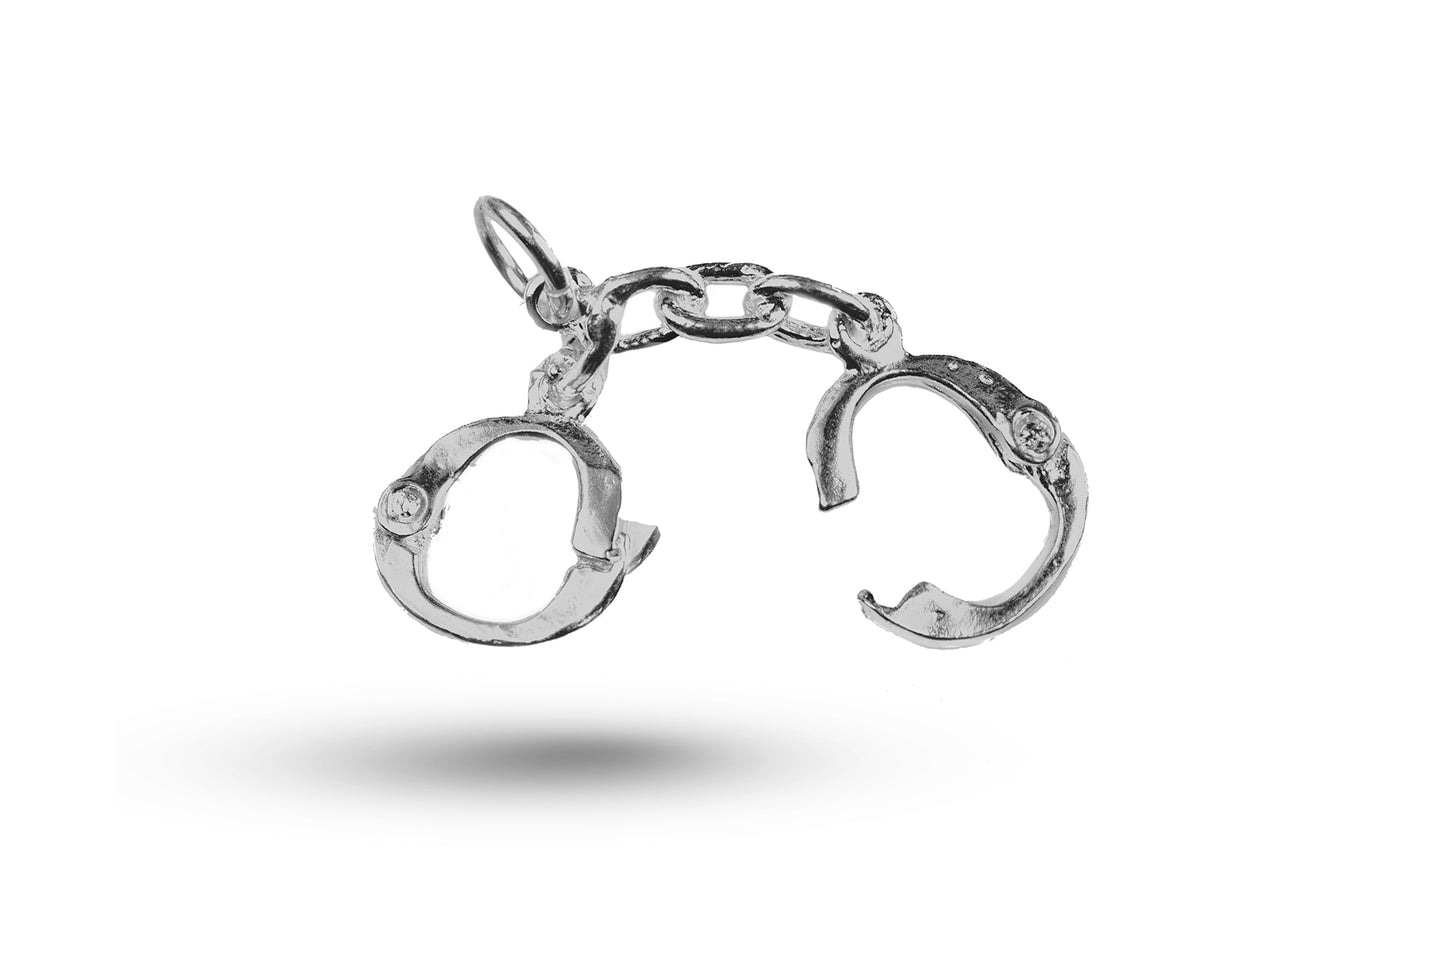 White gold Handcuffs and Keys charm.